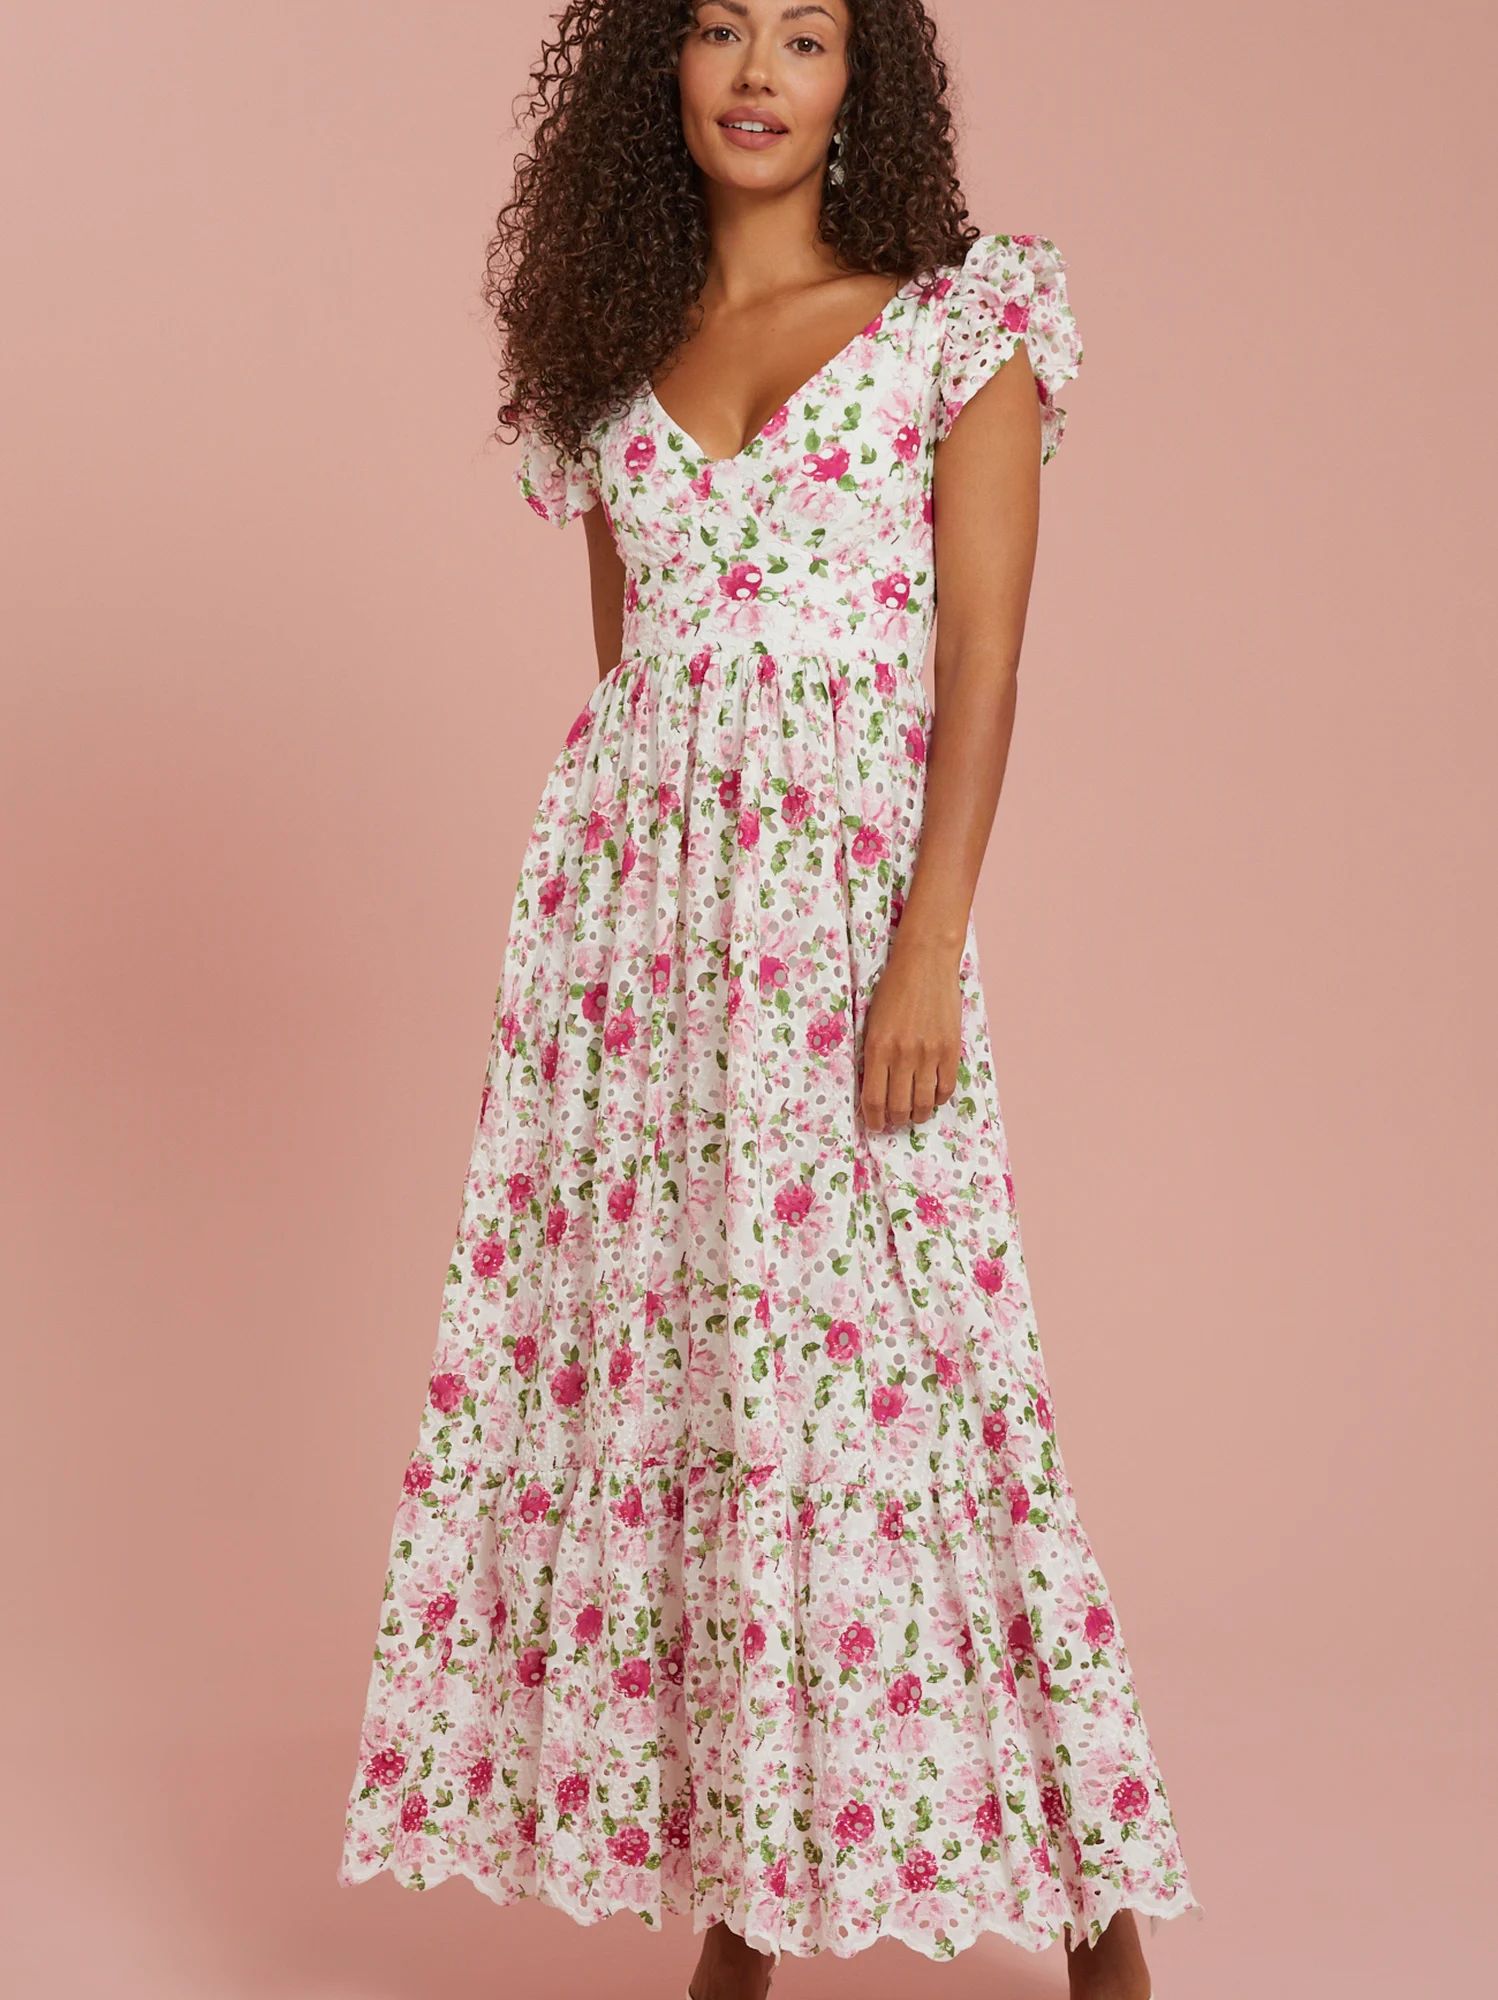 Lindi Eyelet Floral Maxi Dress in Ivory | Altar'd State | Altar'd State